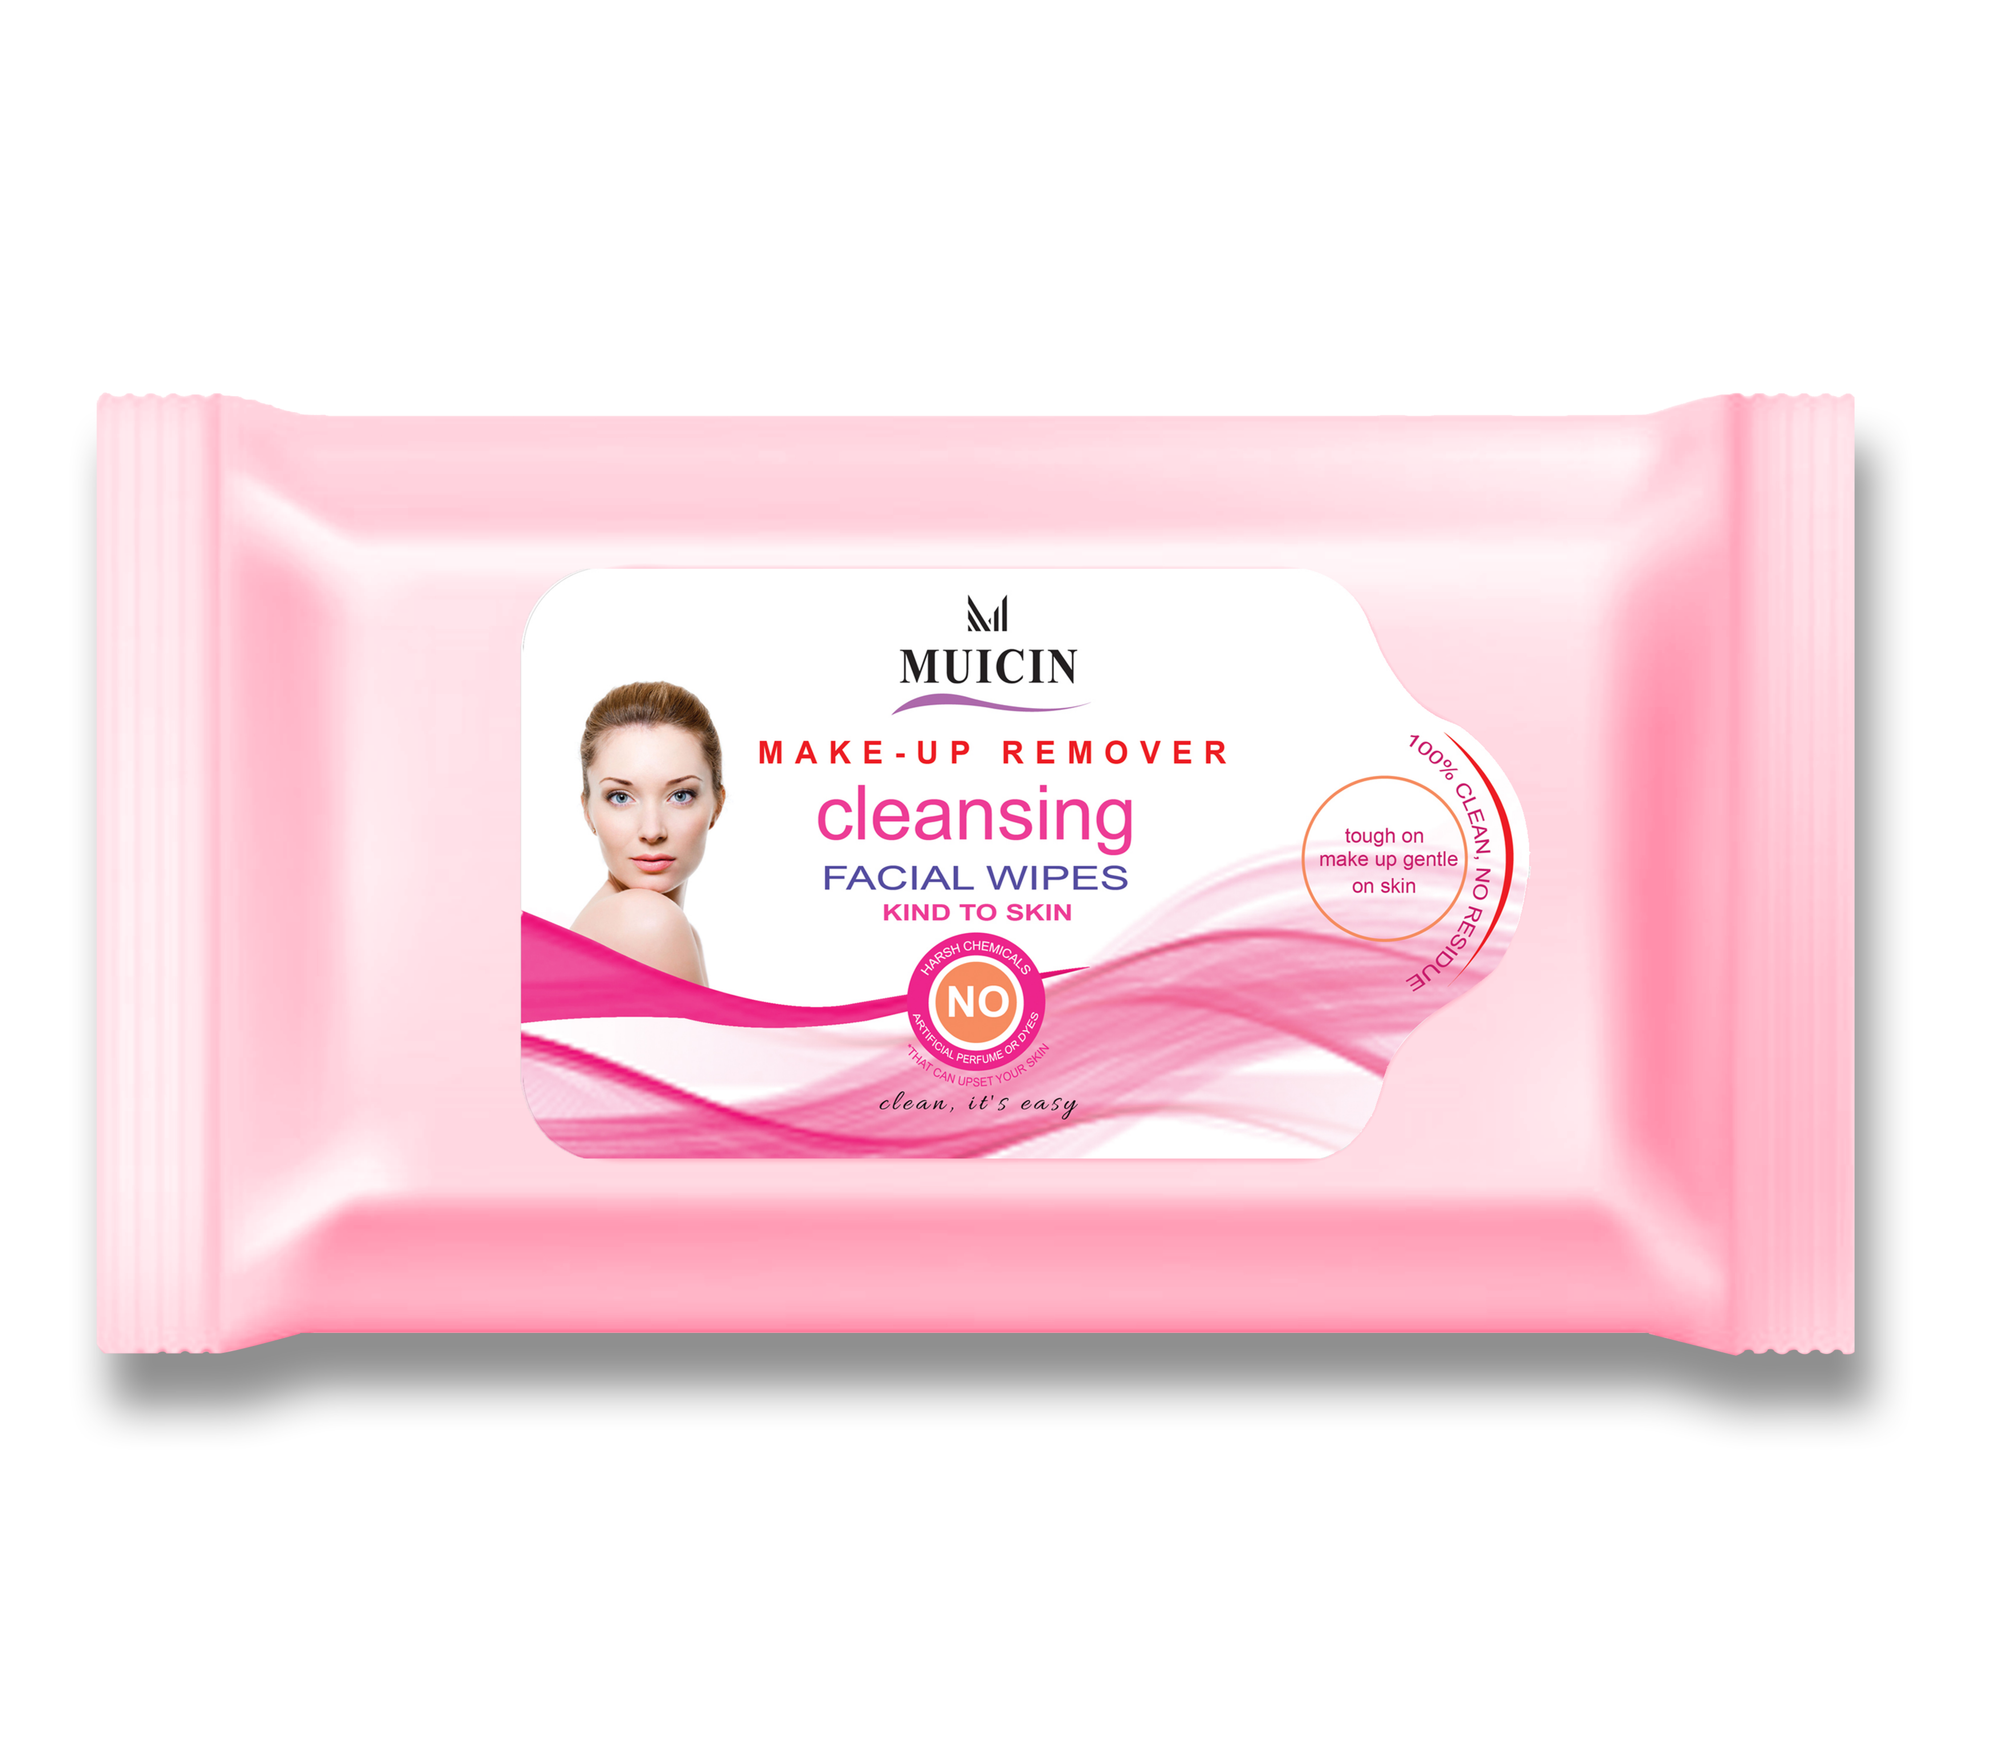 Buy  MUICIN - Cleansing Facial Wipes Makeup Removing - at Best Price Online in Pakistan